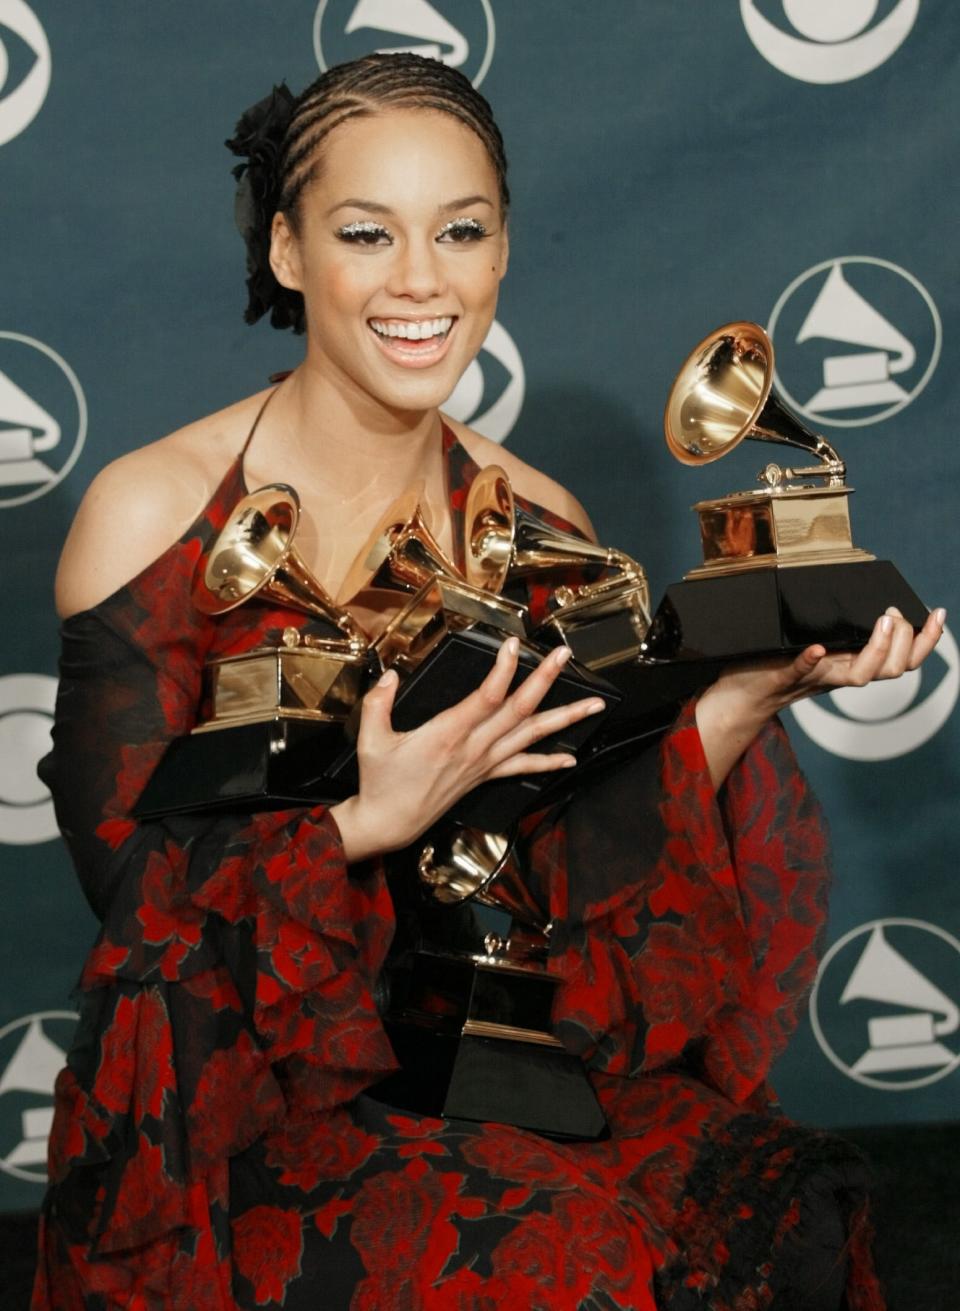 Alicia Keys balances her five Grammys at the 44th Annual Grammy Awards at the Staples Center in 2002.